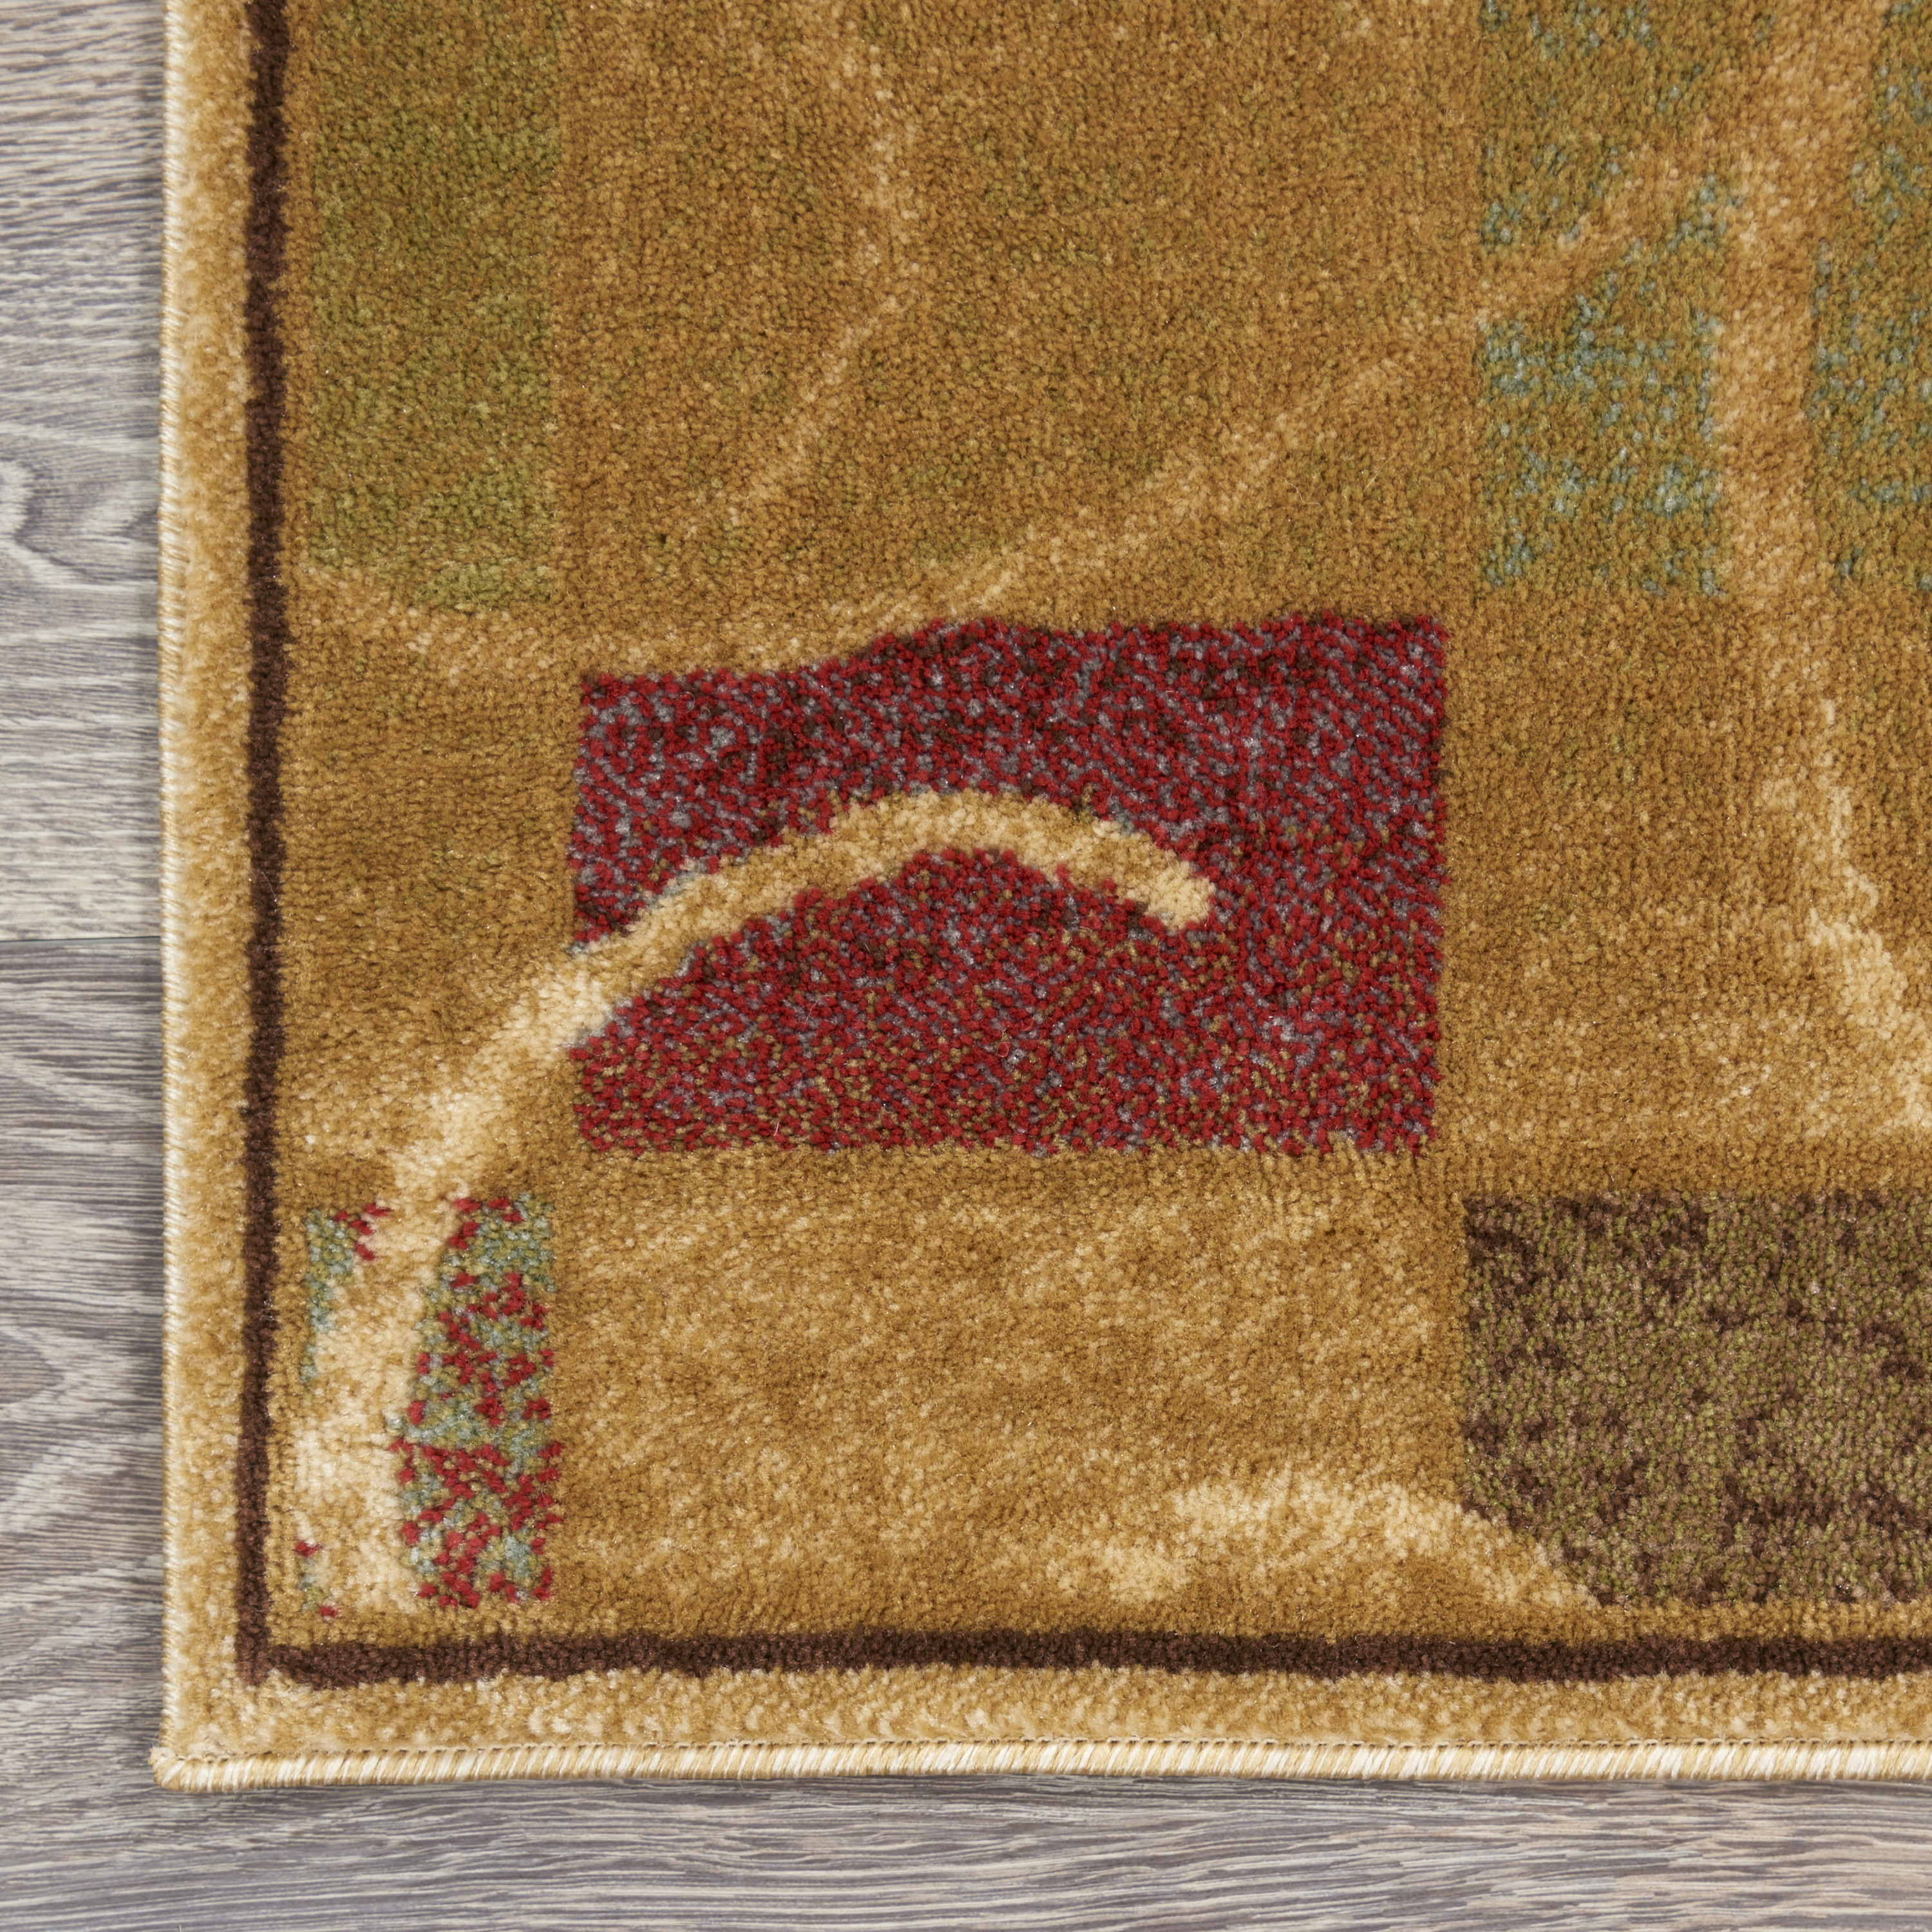 Nourison Expressions Modern Beige 2' x 2'9" Area Rug, (2x3) - image 4 of 8